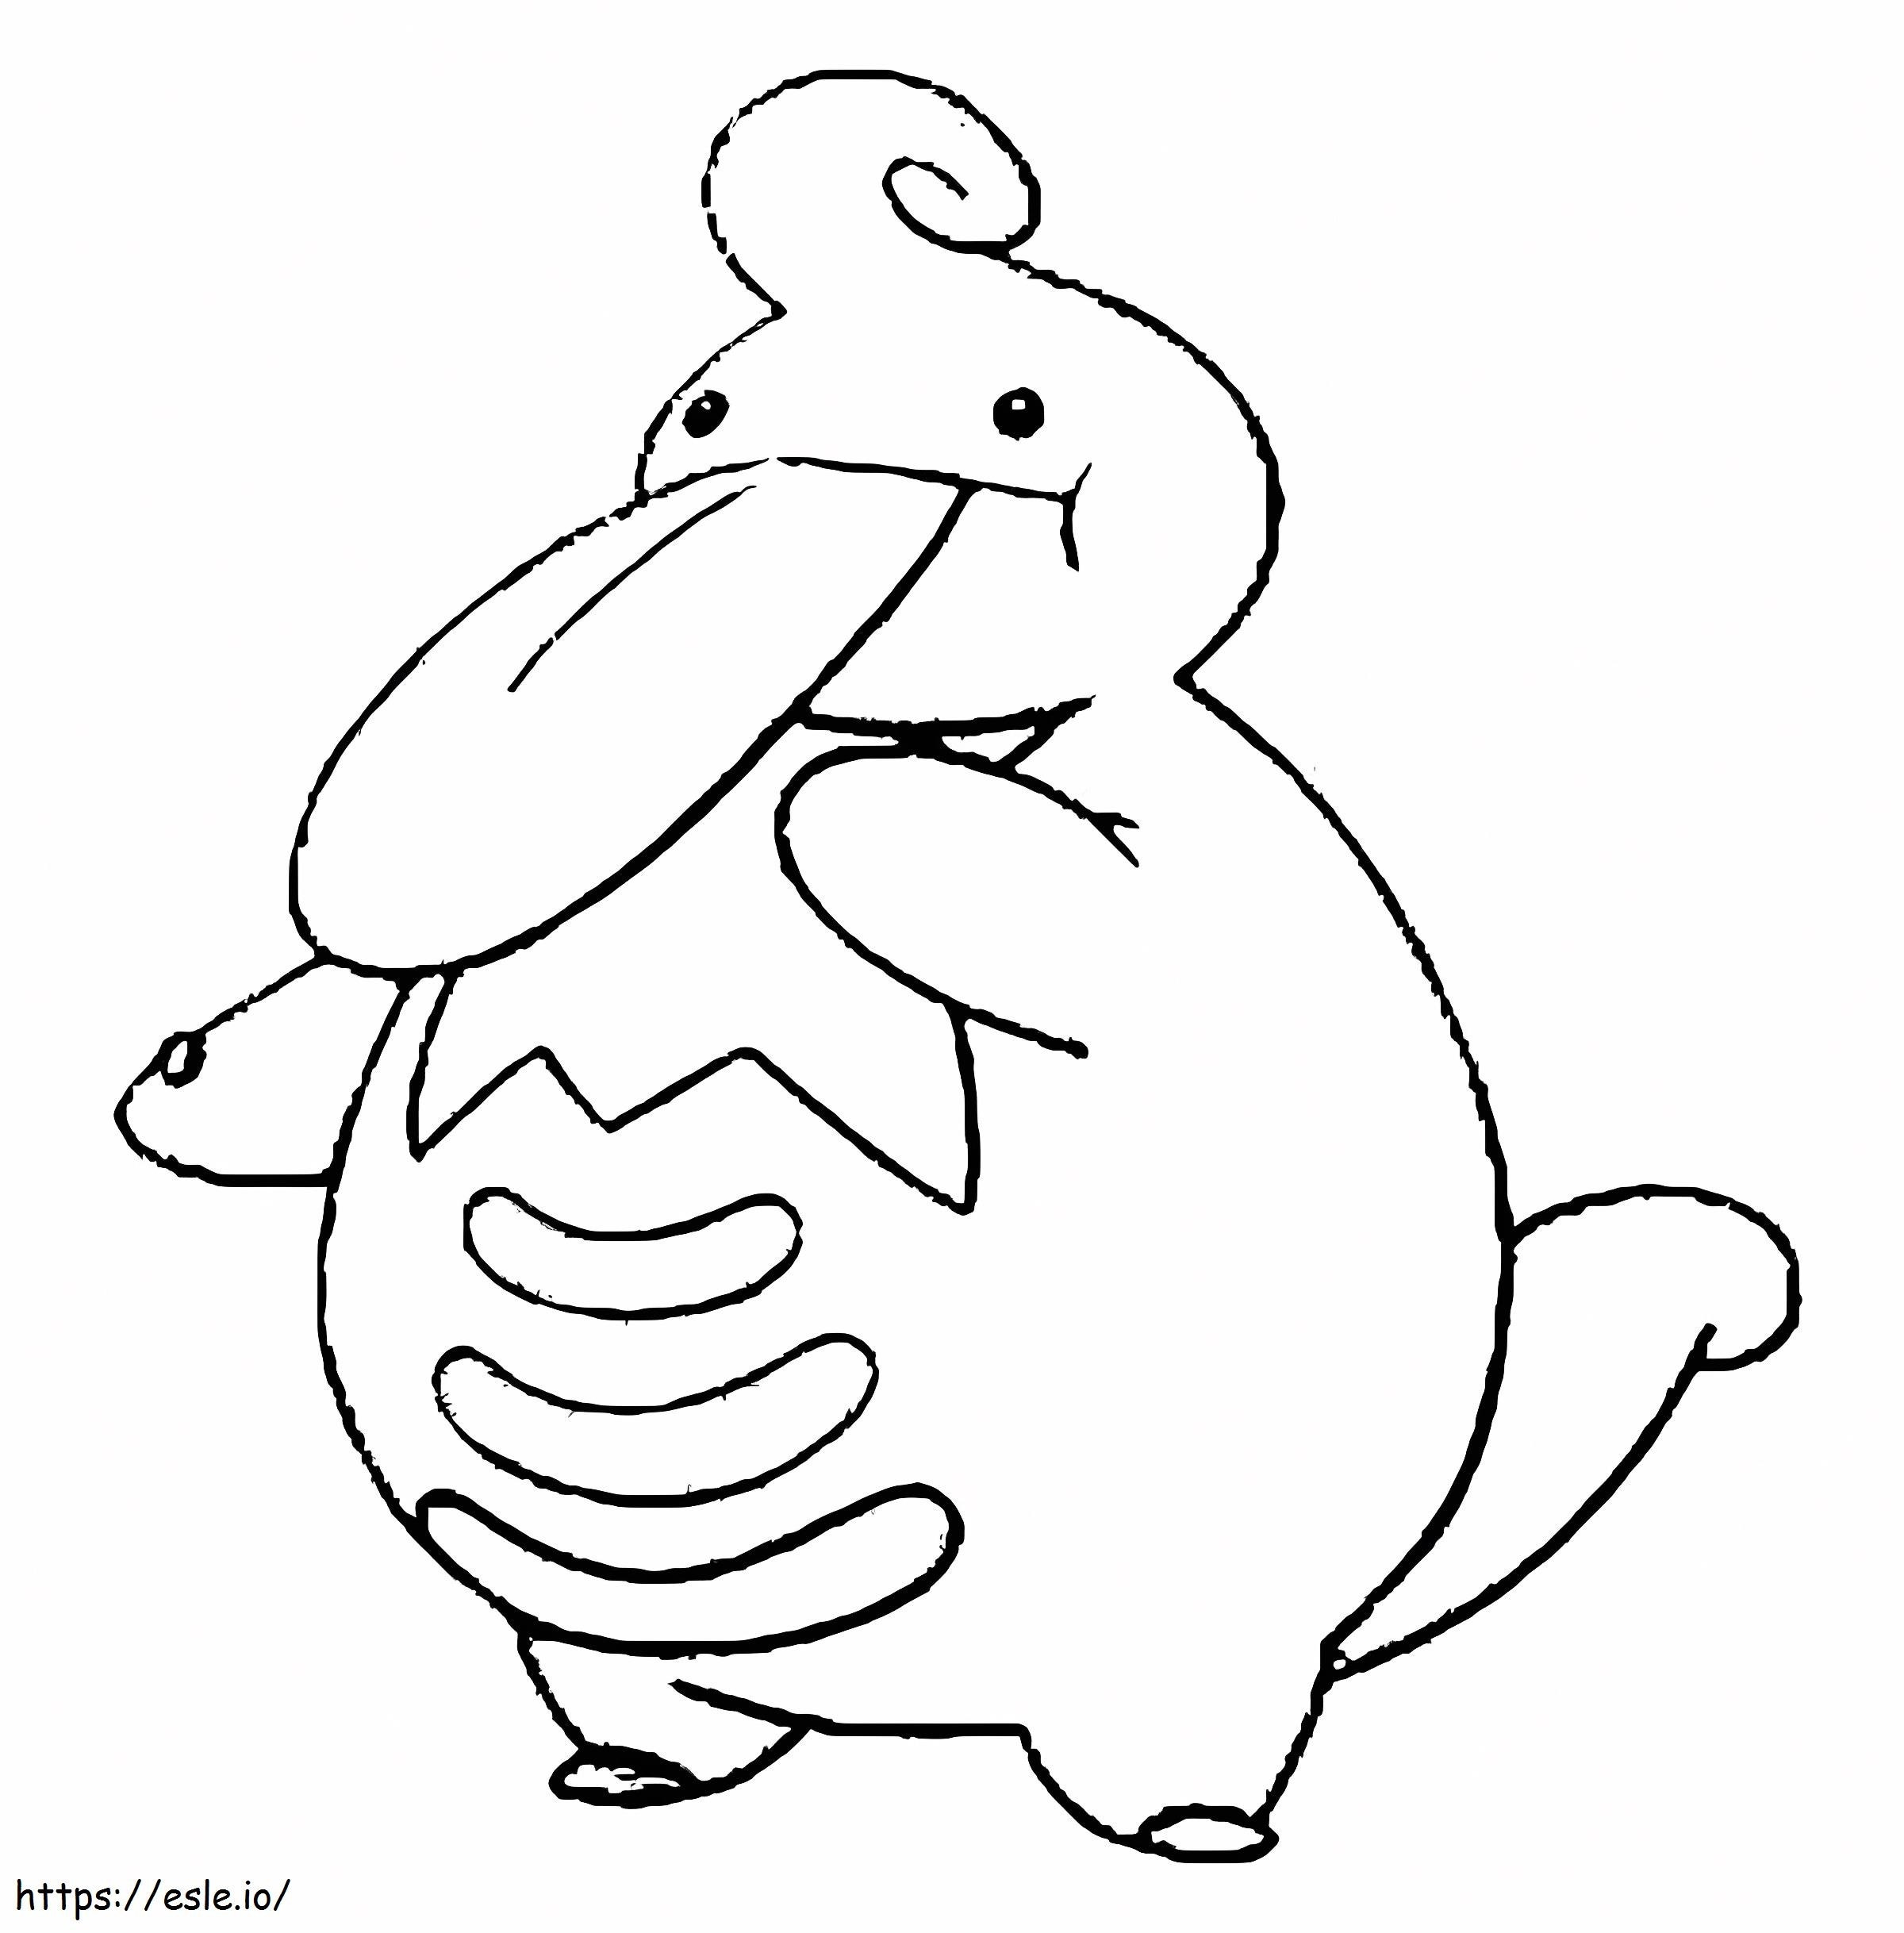 Lickilicky Gen 4 Pokemon coloring page